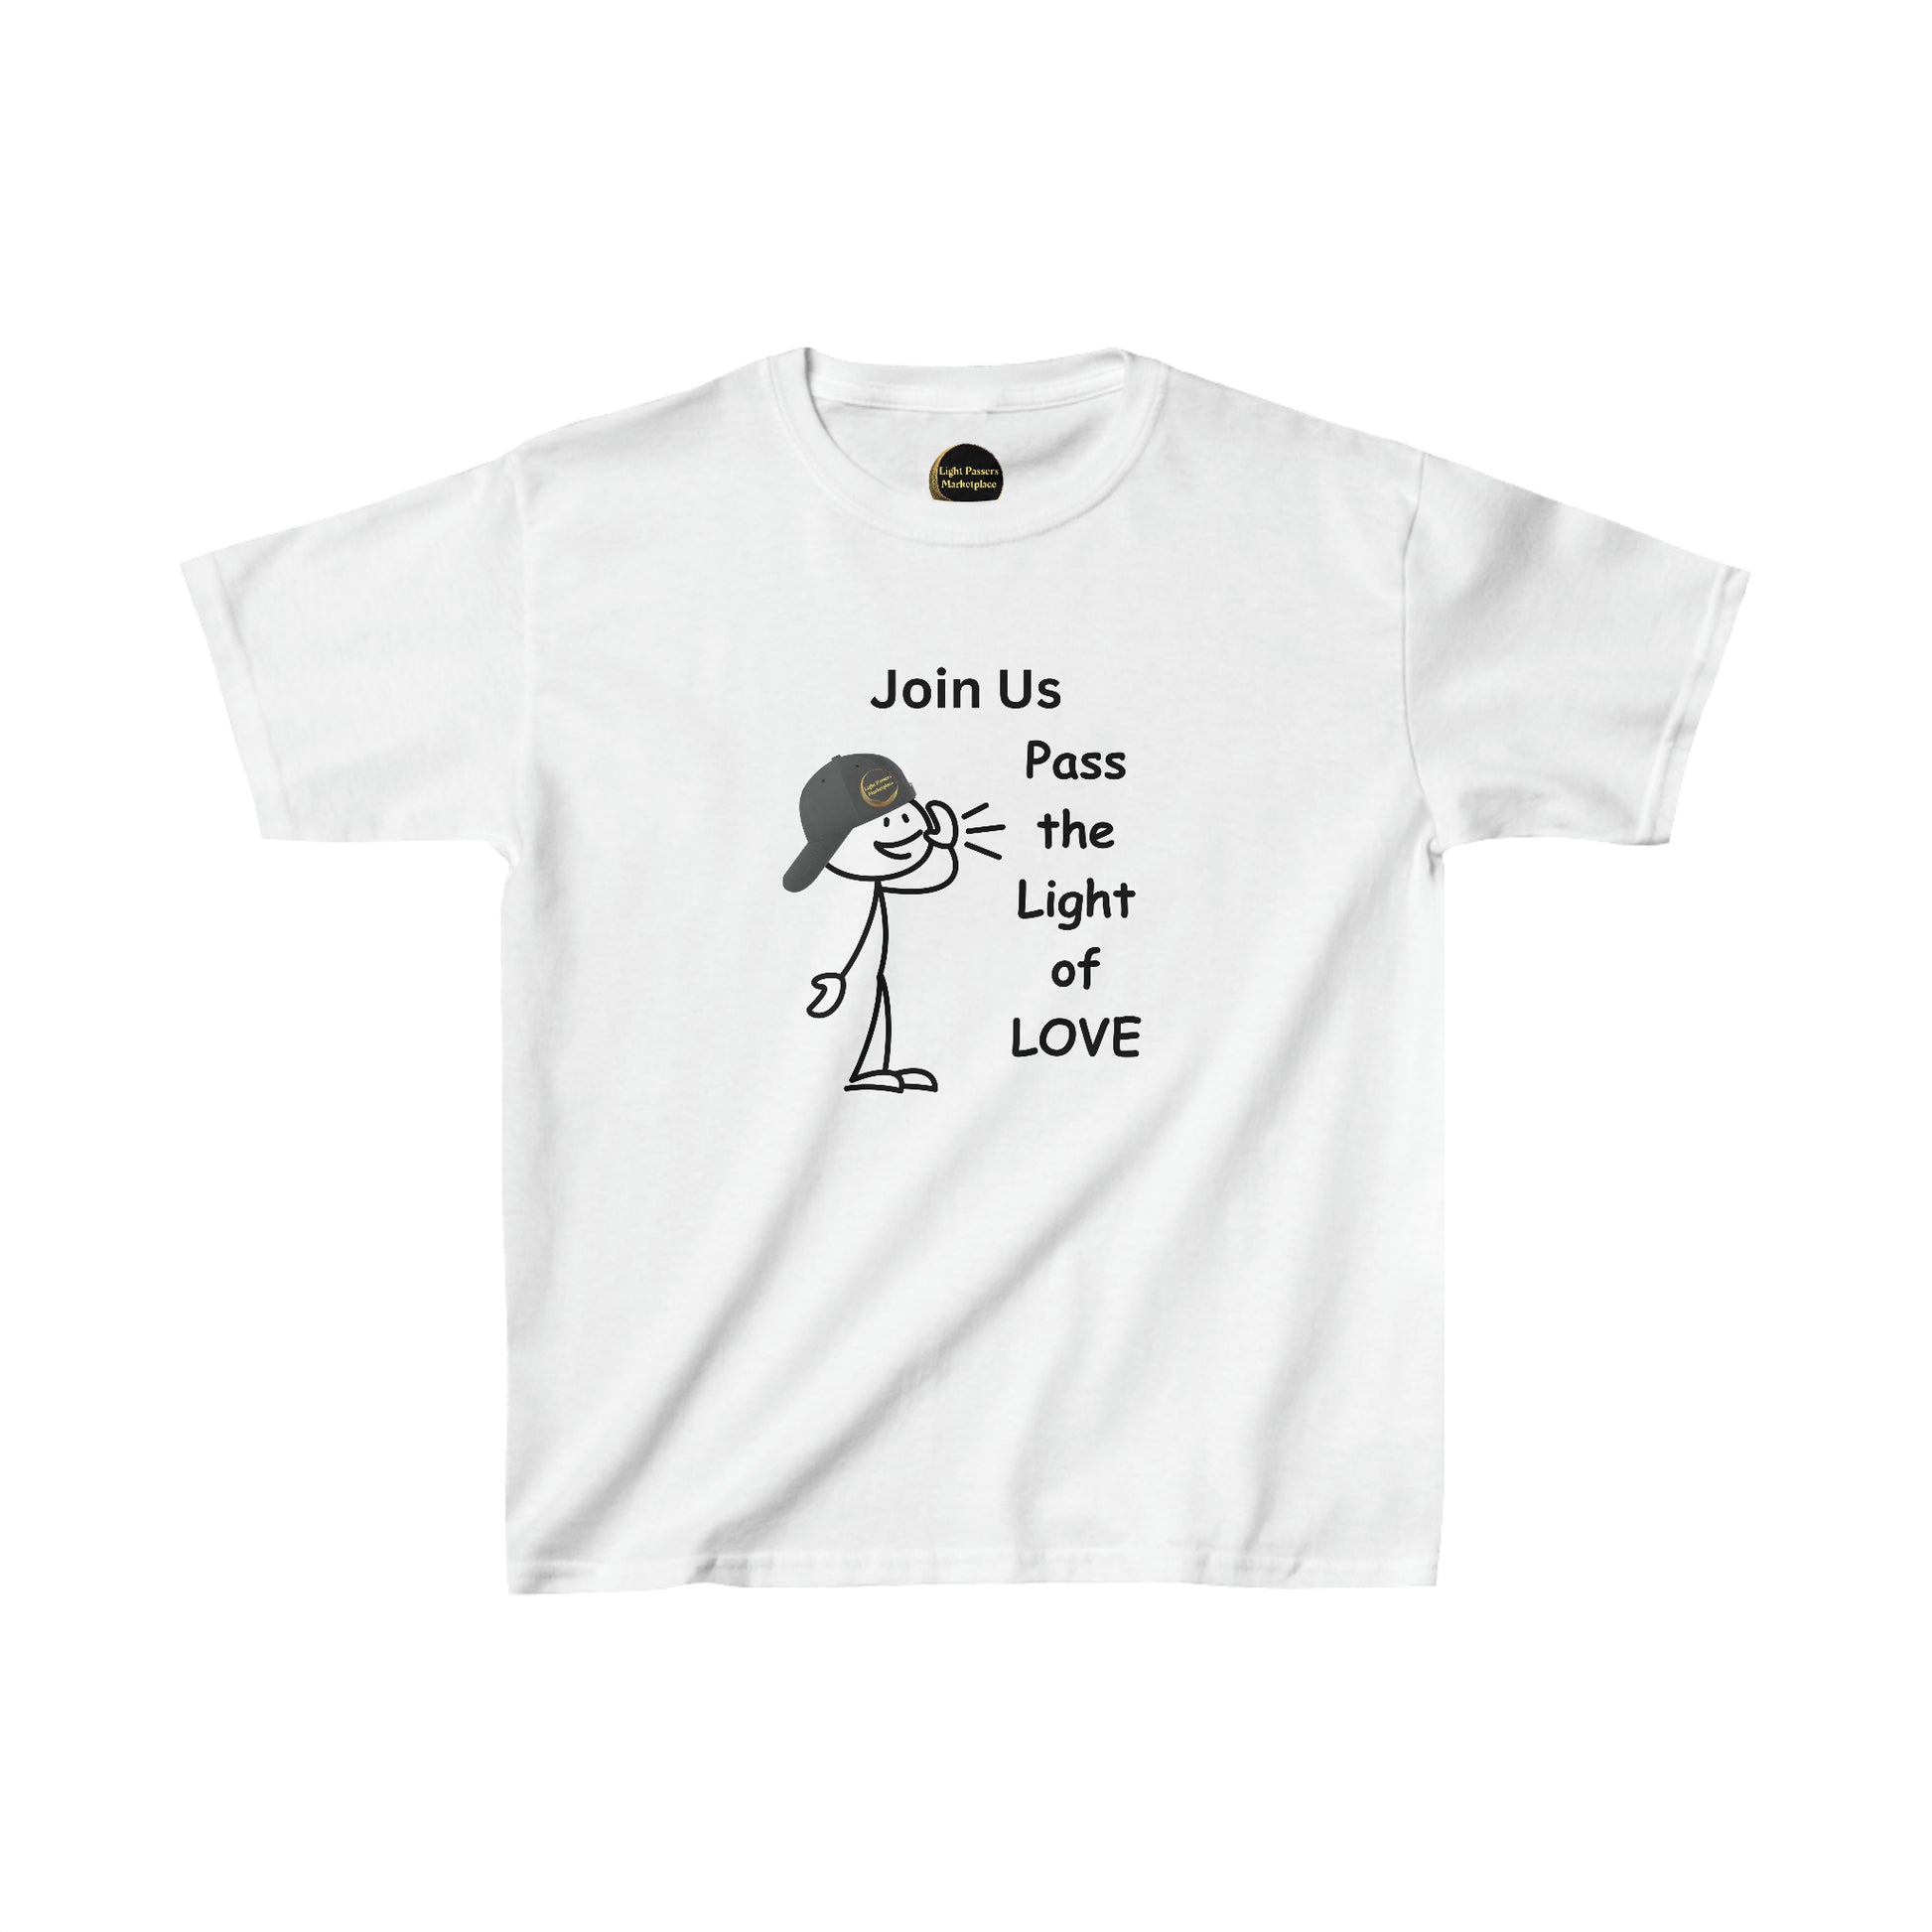 A white youth t-shirt featuring a cartoon stick figure with a hat. Made of 100% cotton, ideal for printing, with twill tape shoulders and ribbed collar for durability.